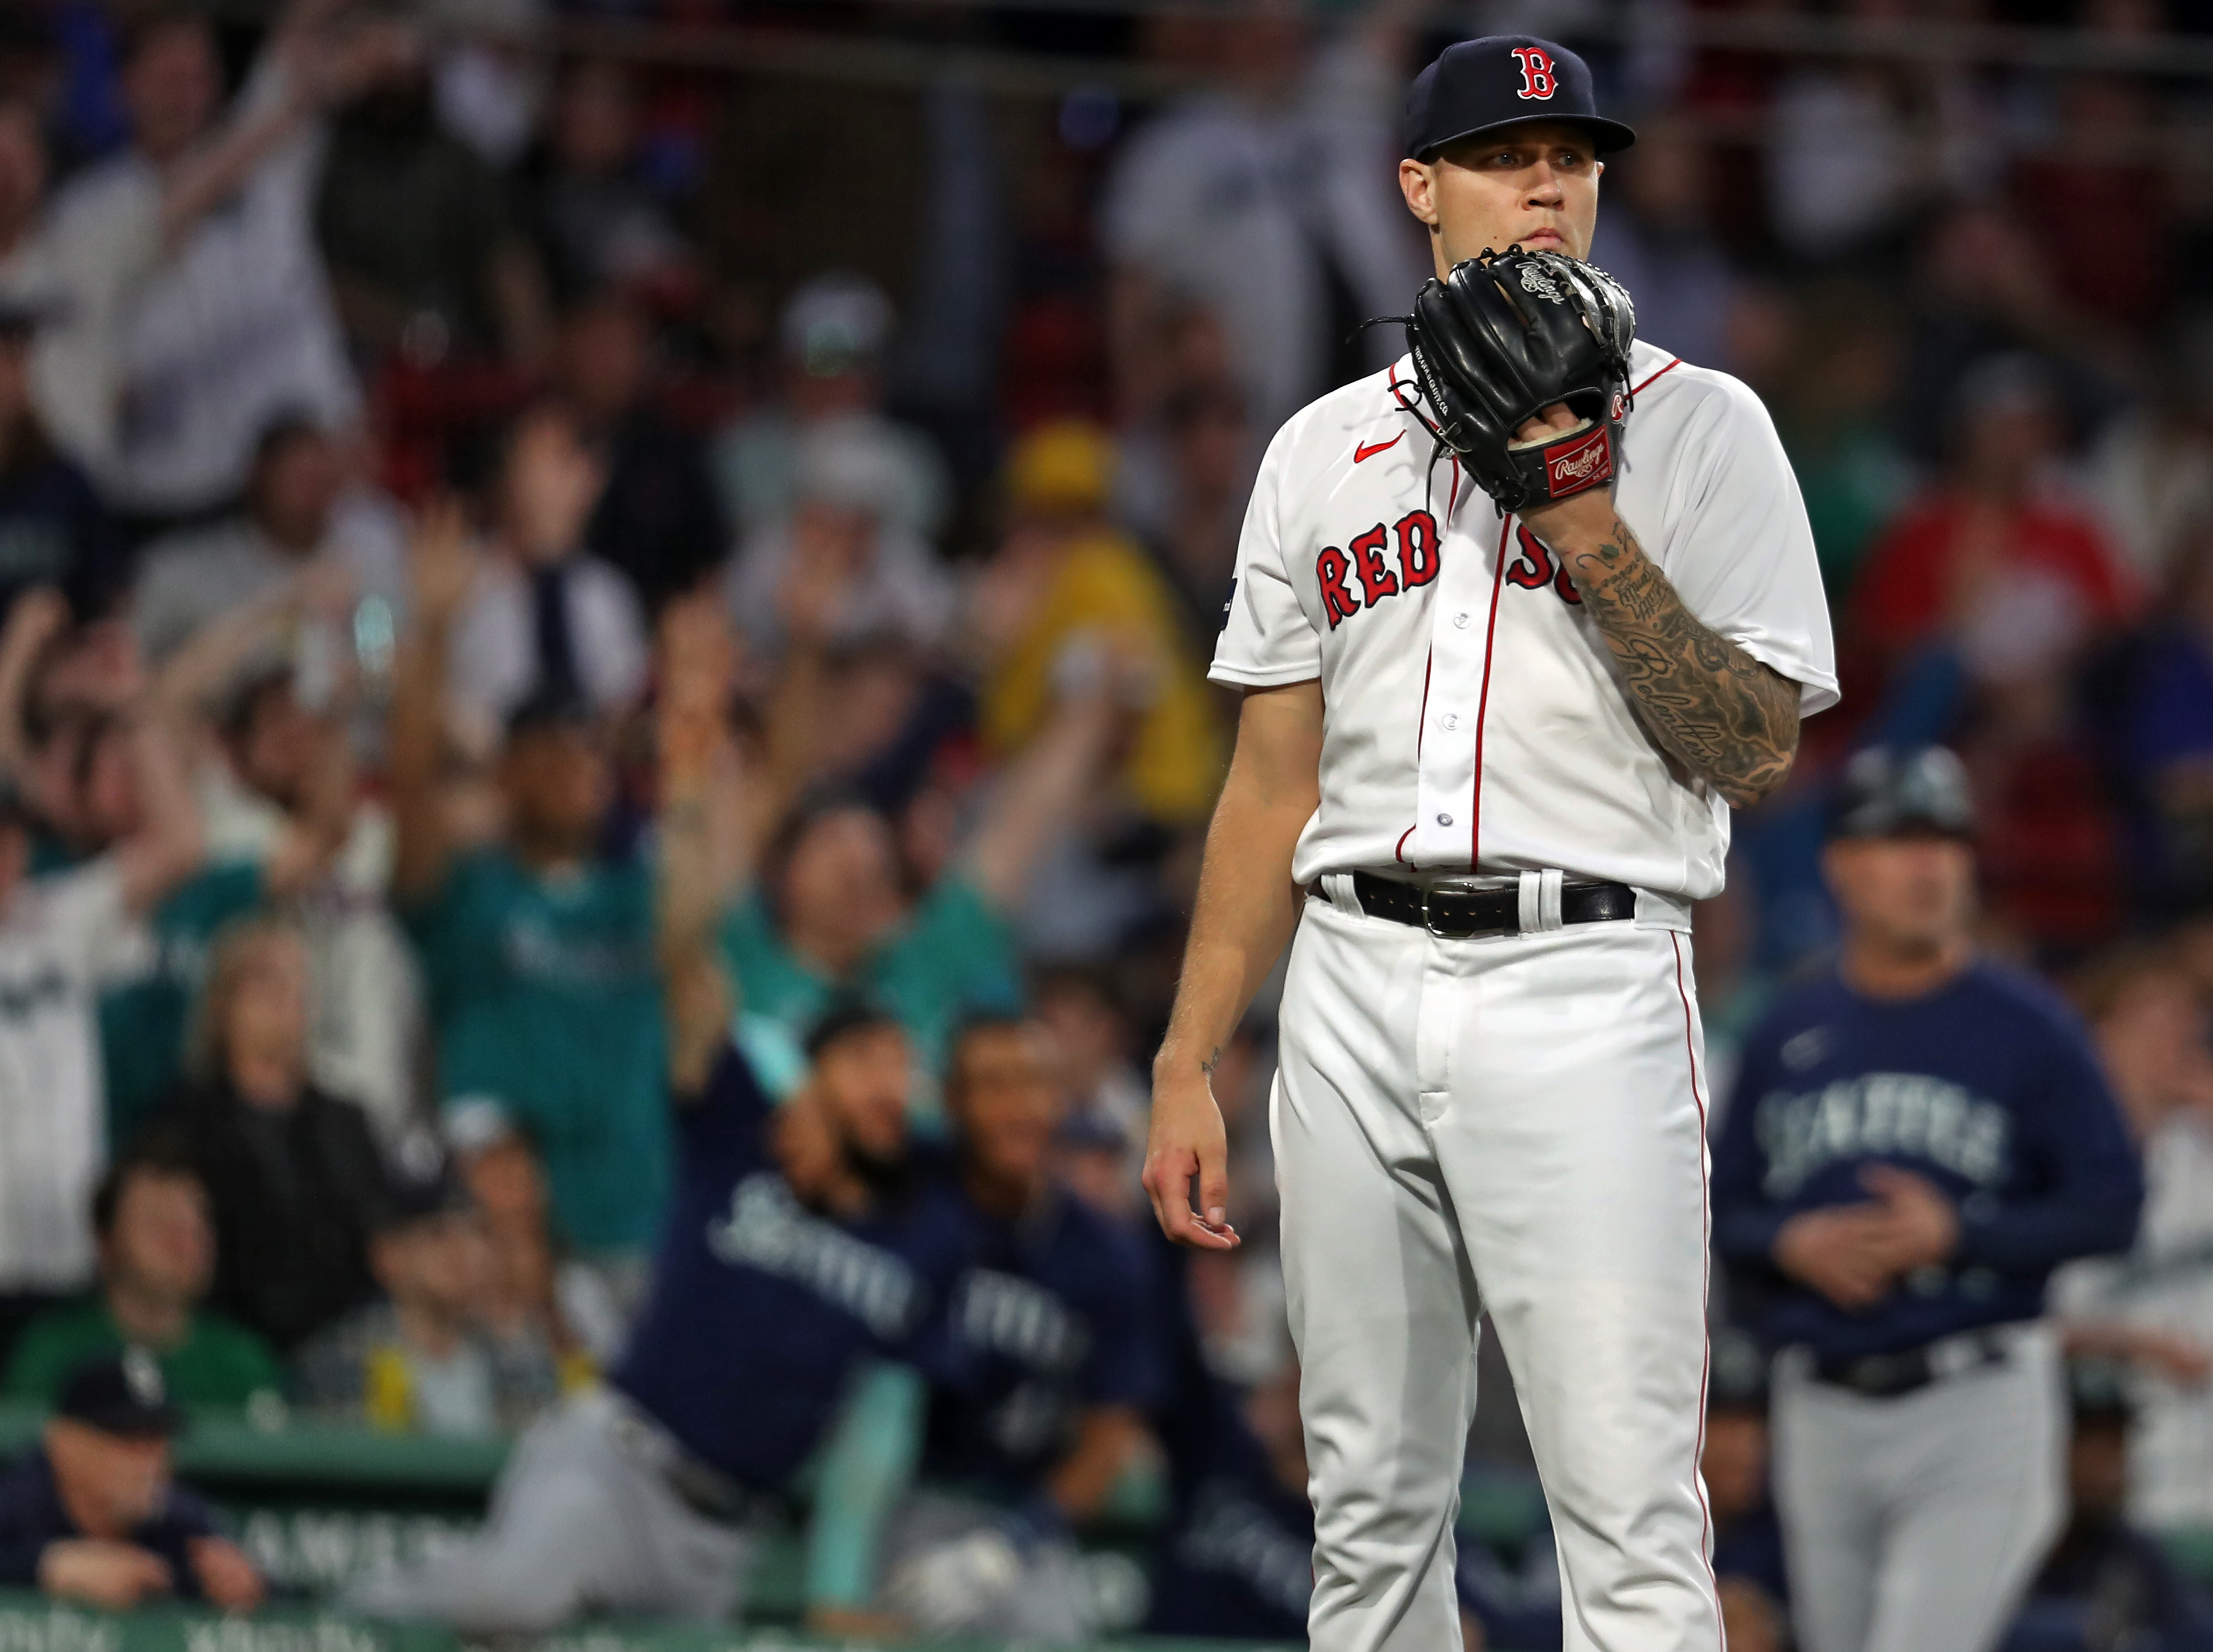 The Red Sox knew they were up against a tough pitcher, but had the right  plan to complete a sweep - The Boston Globe